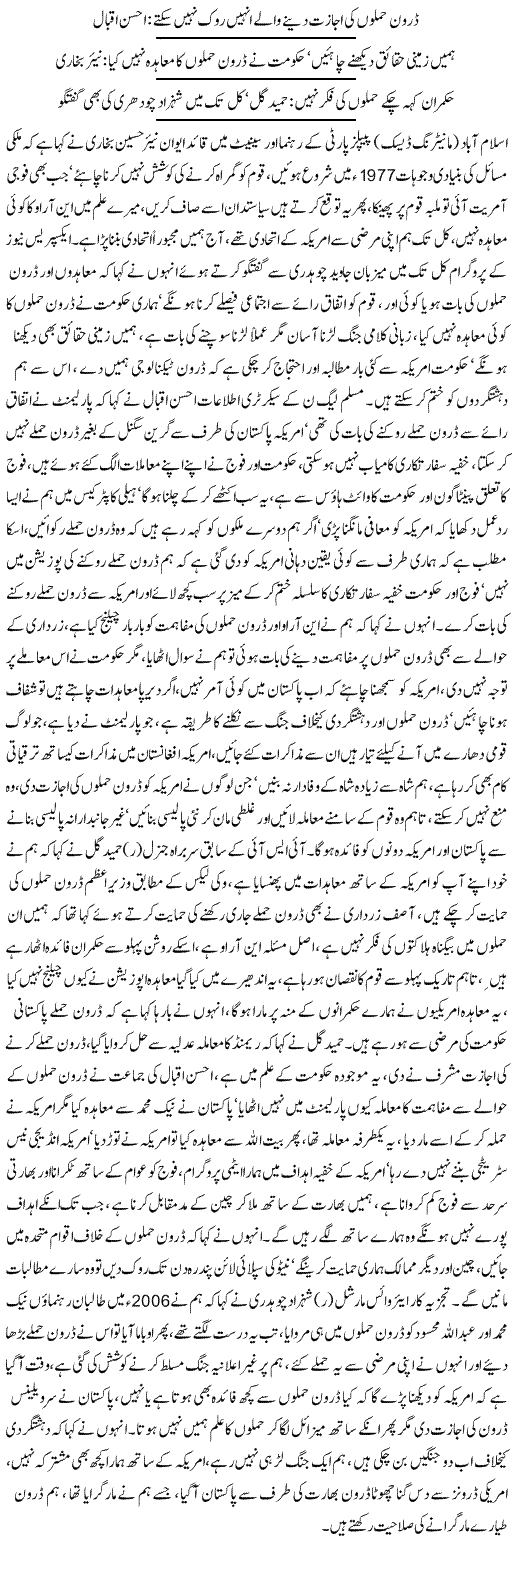 Why Government Not Stops Drones Ahsan Iqbal - News in Urdu